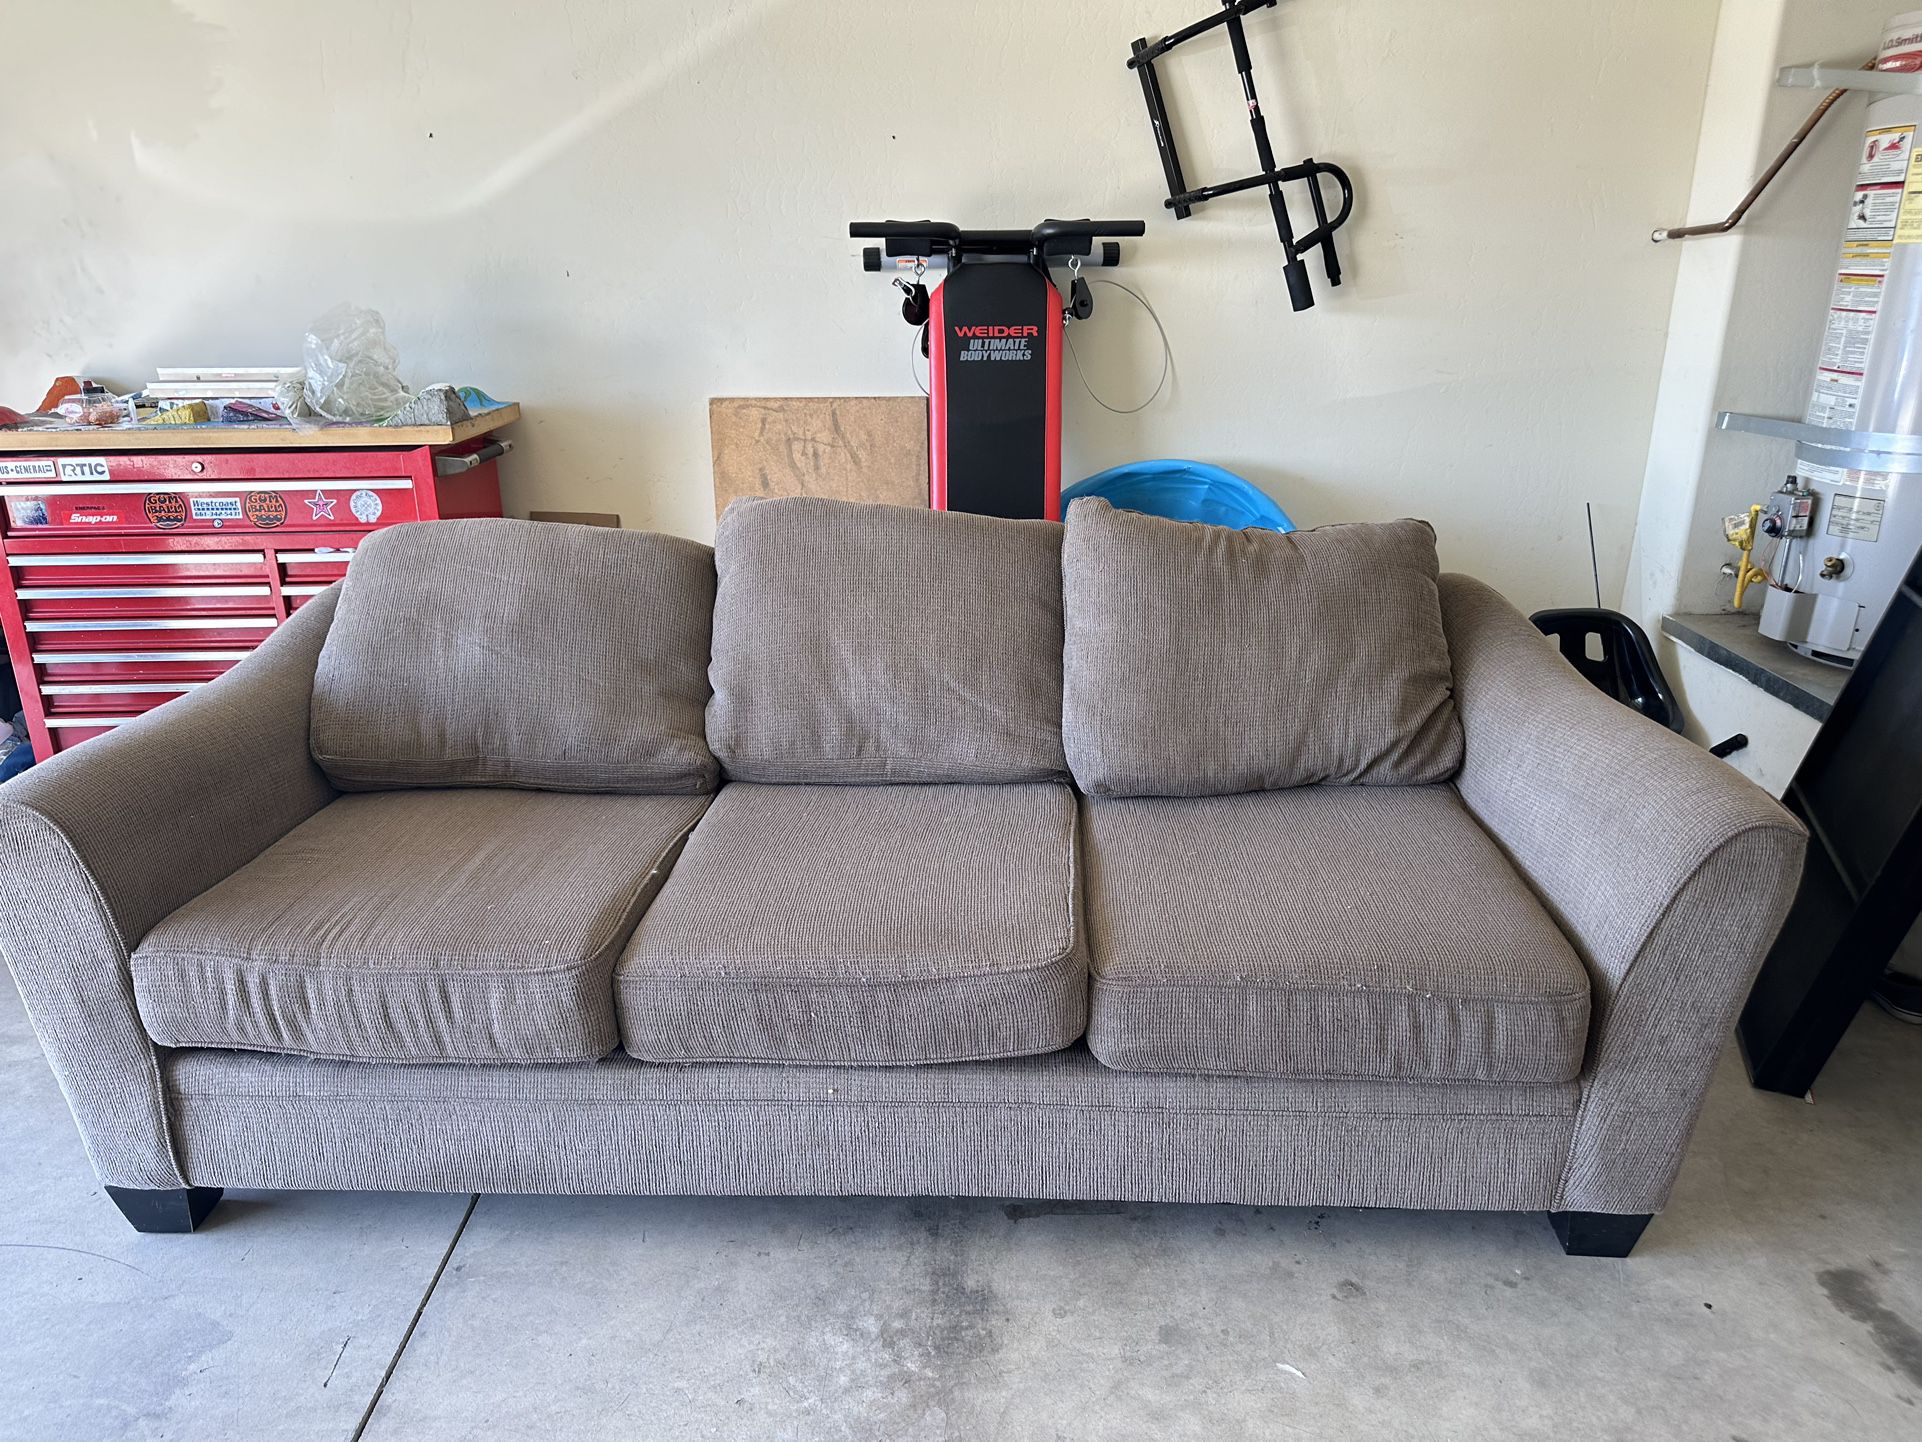 FREE!!!  BIG ASS COUCH / SOFA 